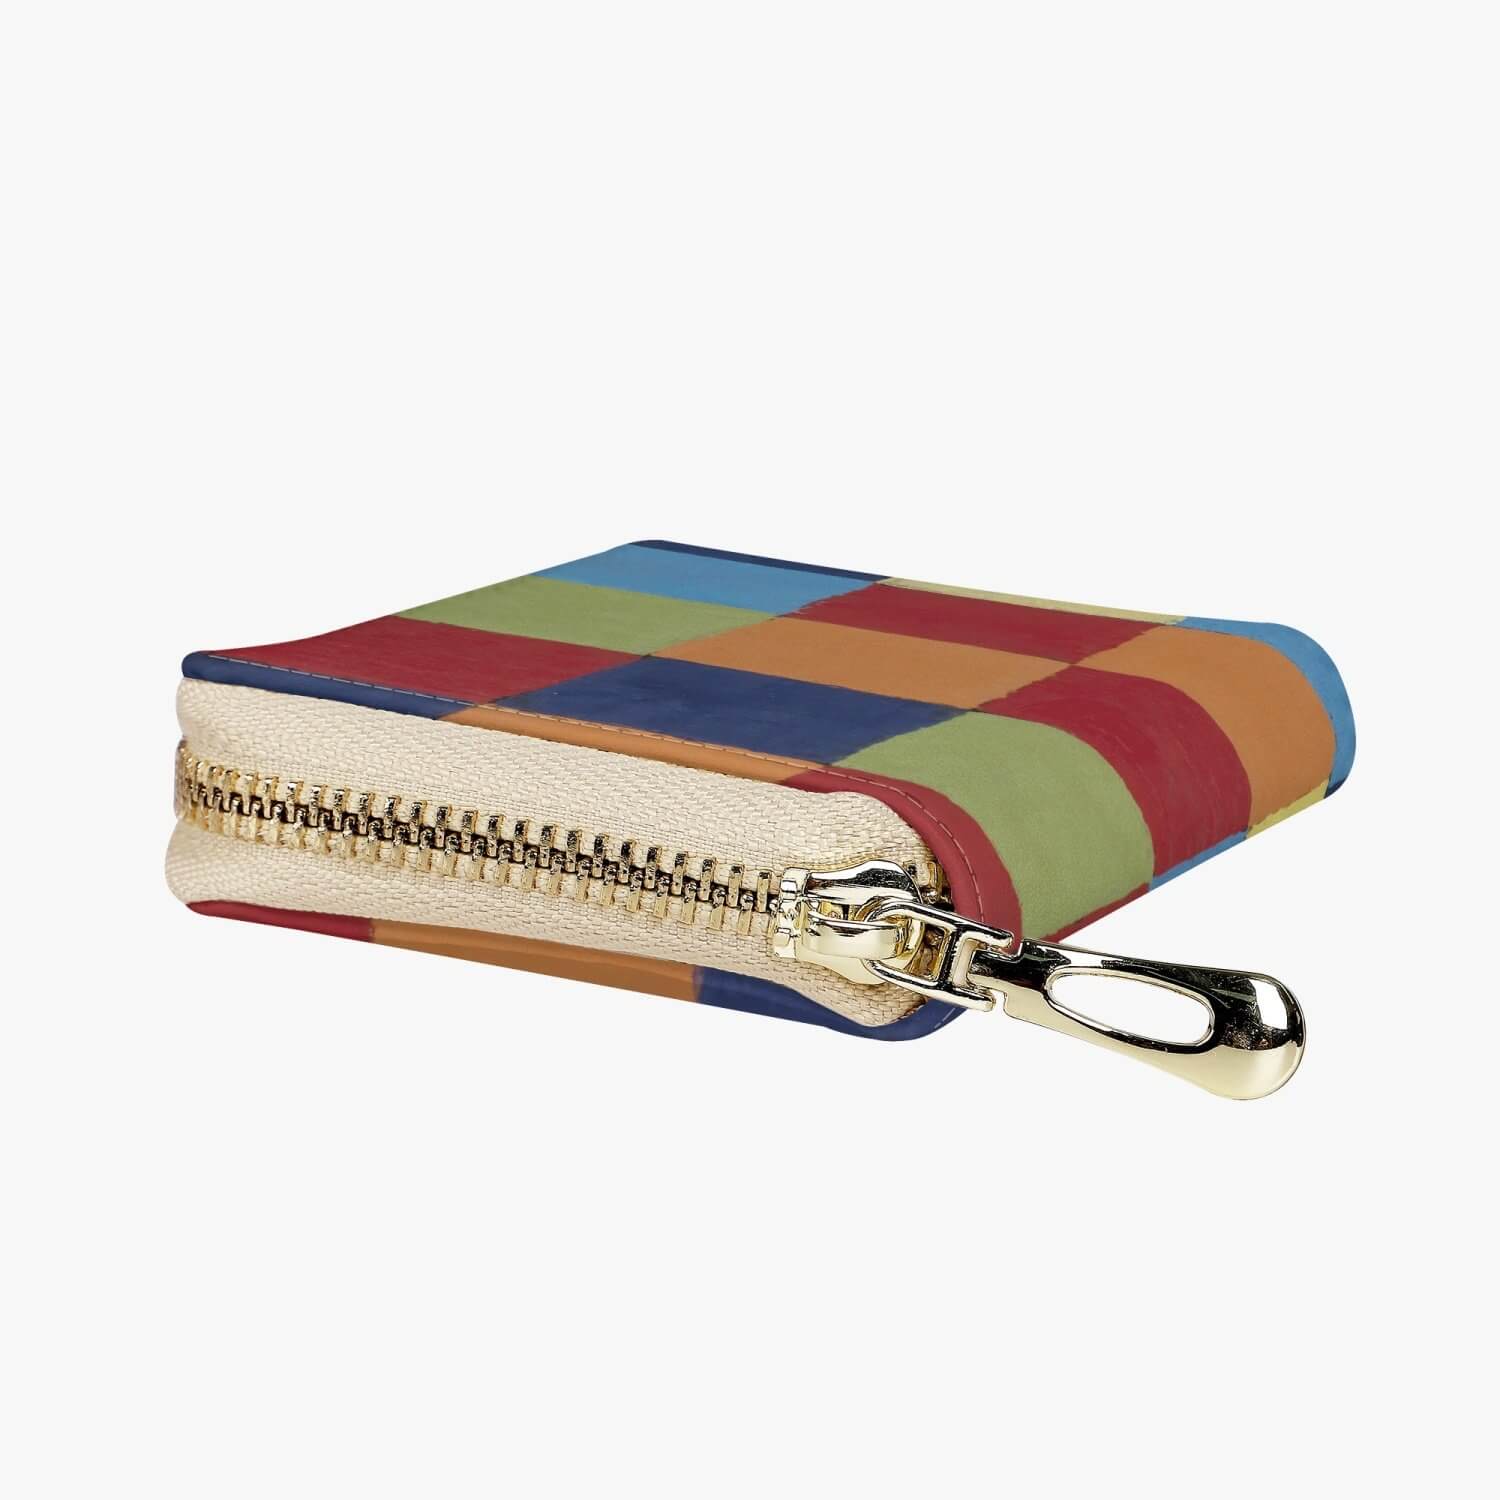 282. Short Type Zipper Card Holder Print on any thing USA/STOD clothes